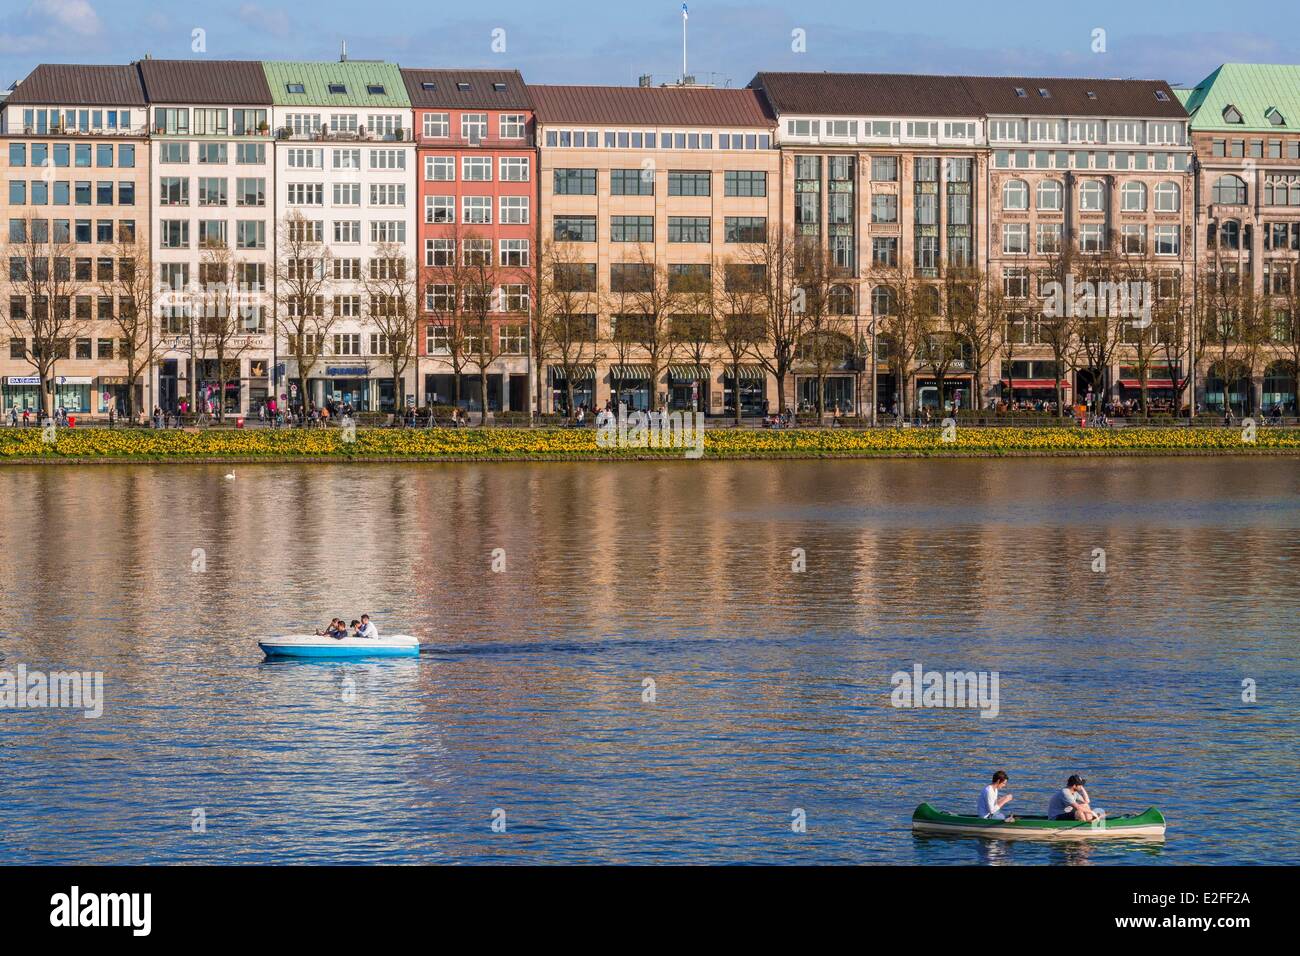 Germany, Hamburg, Binnenalster, banks of the Alster lake view from the Lombardsbrucke Stock Photo